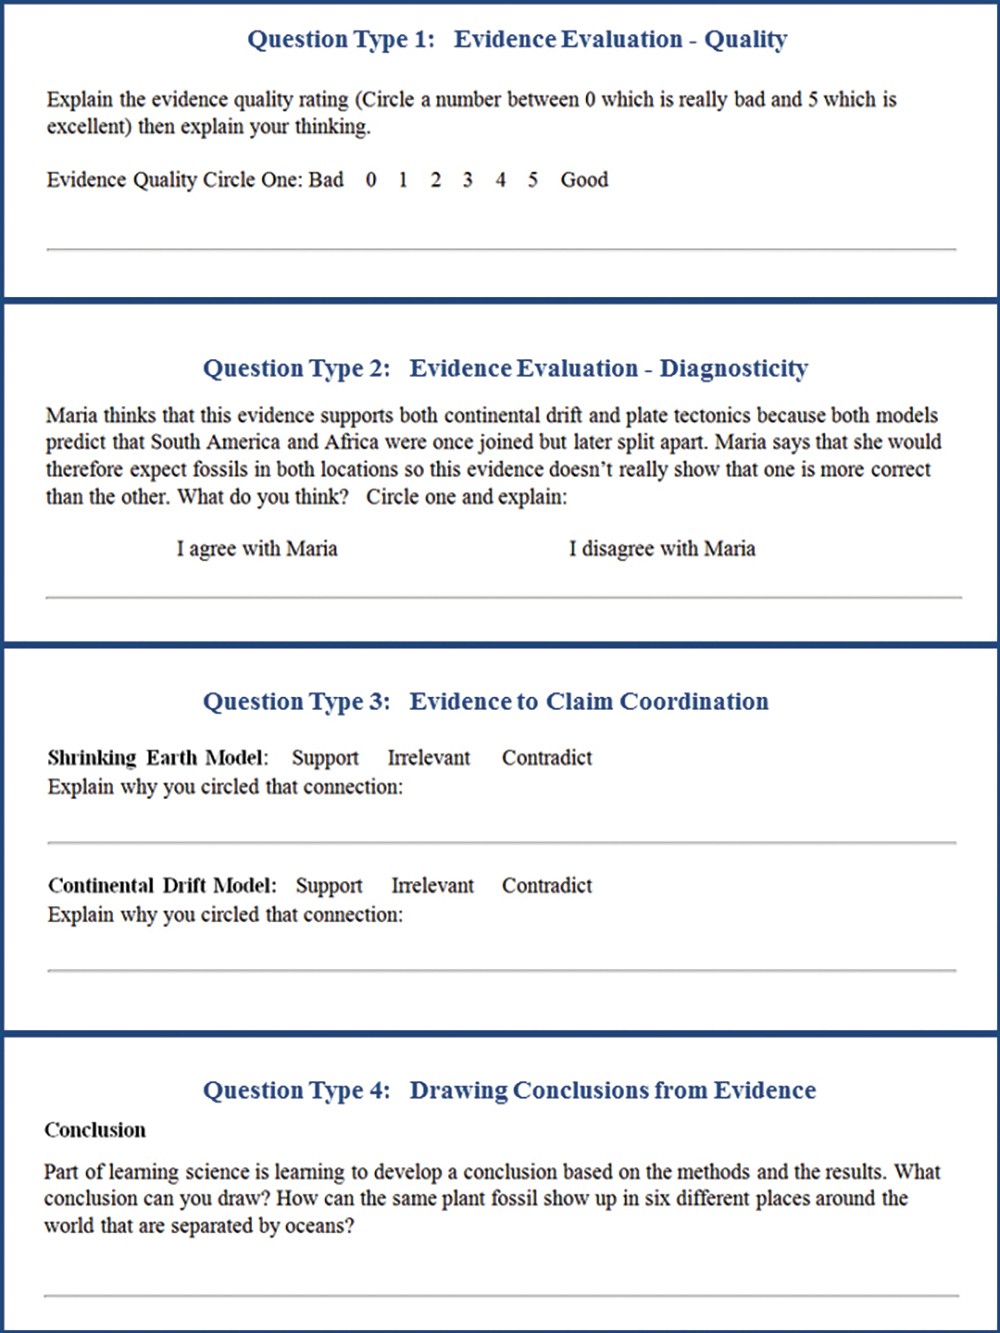 Evidence question types.